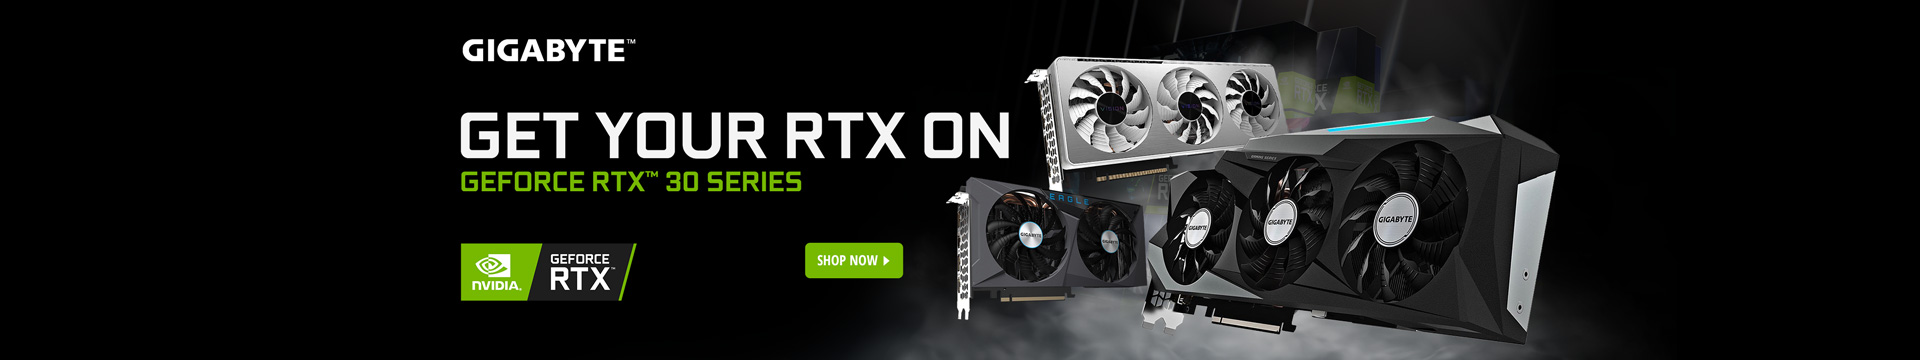 Get your RTX on